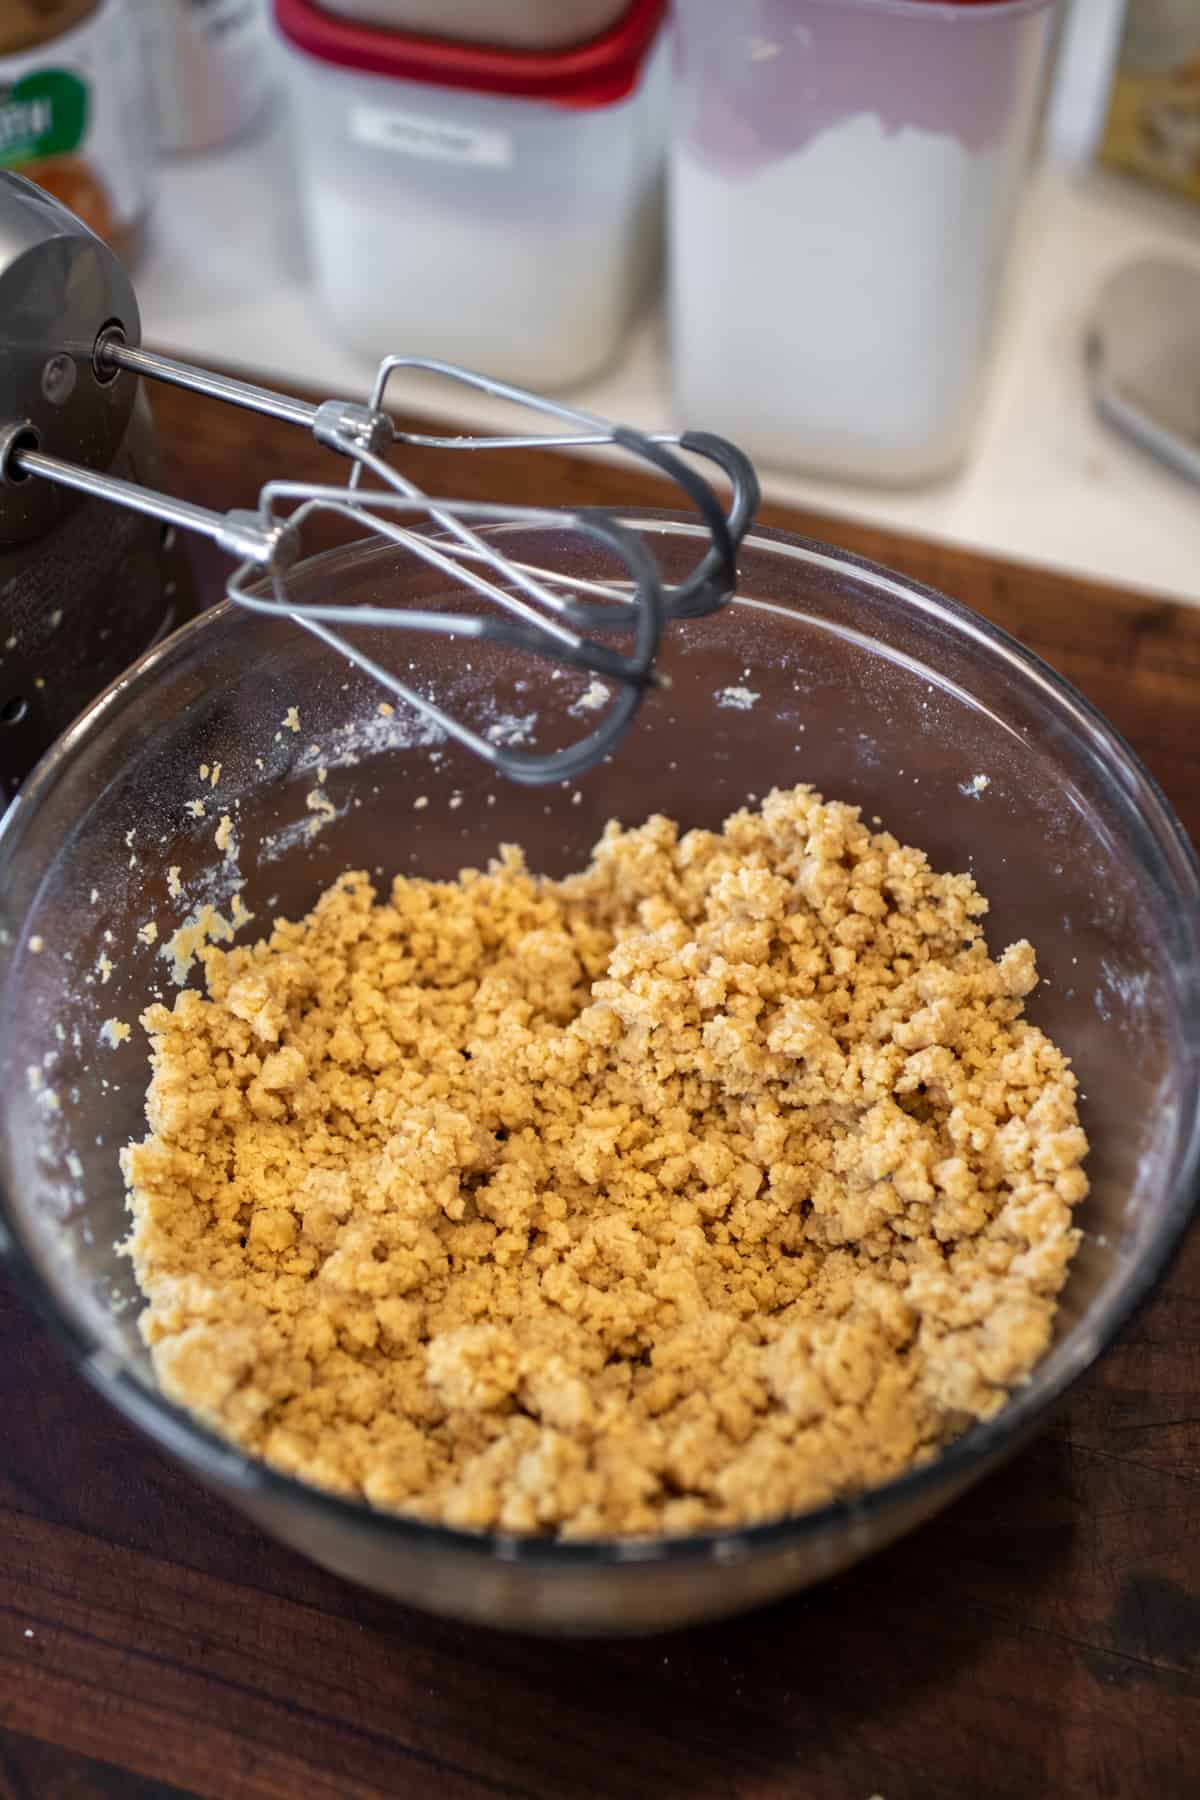 Cookie dough mixed and ready to shape into balls.